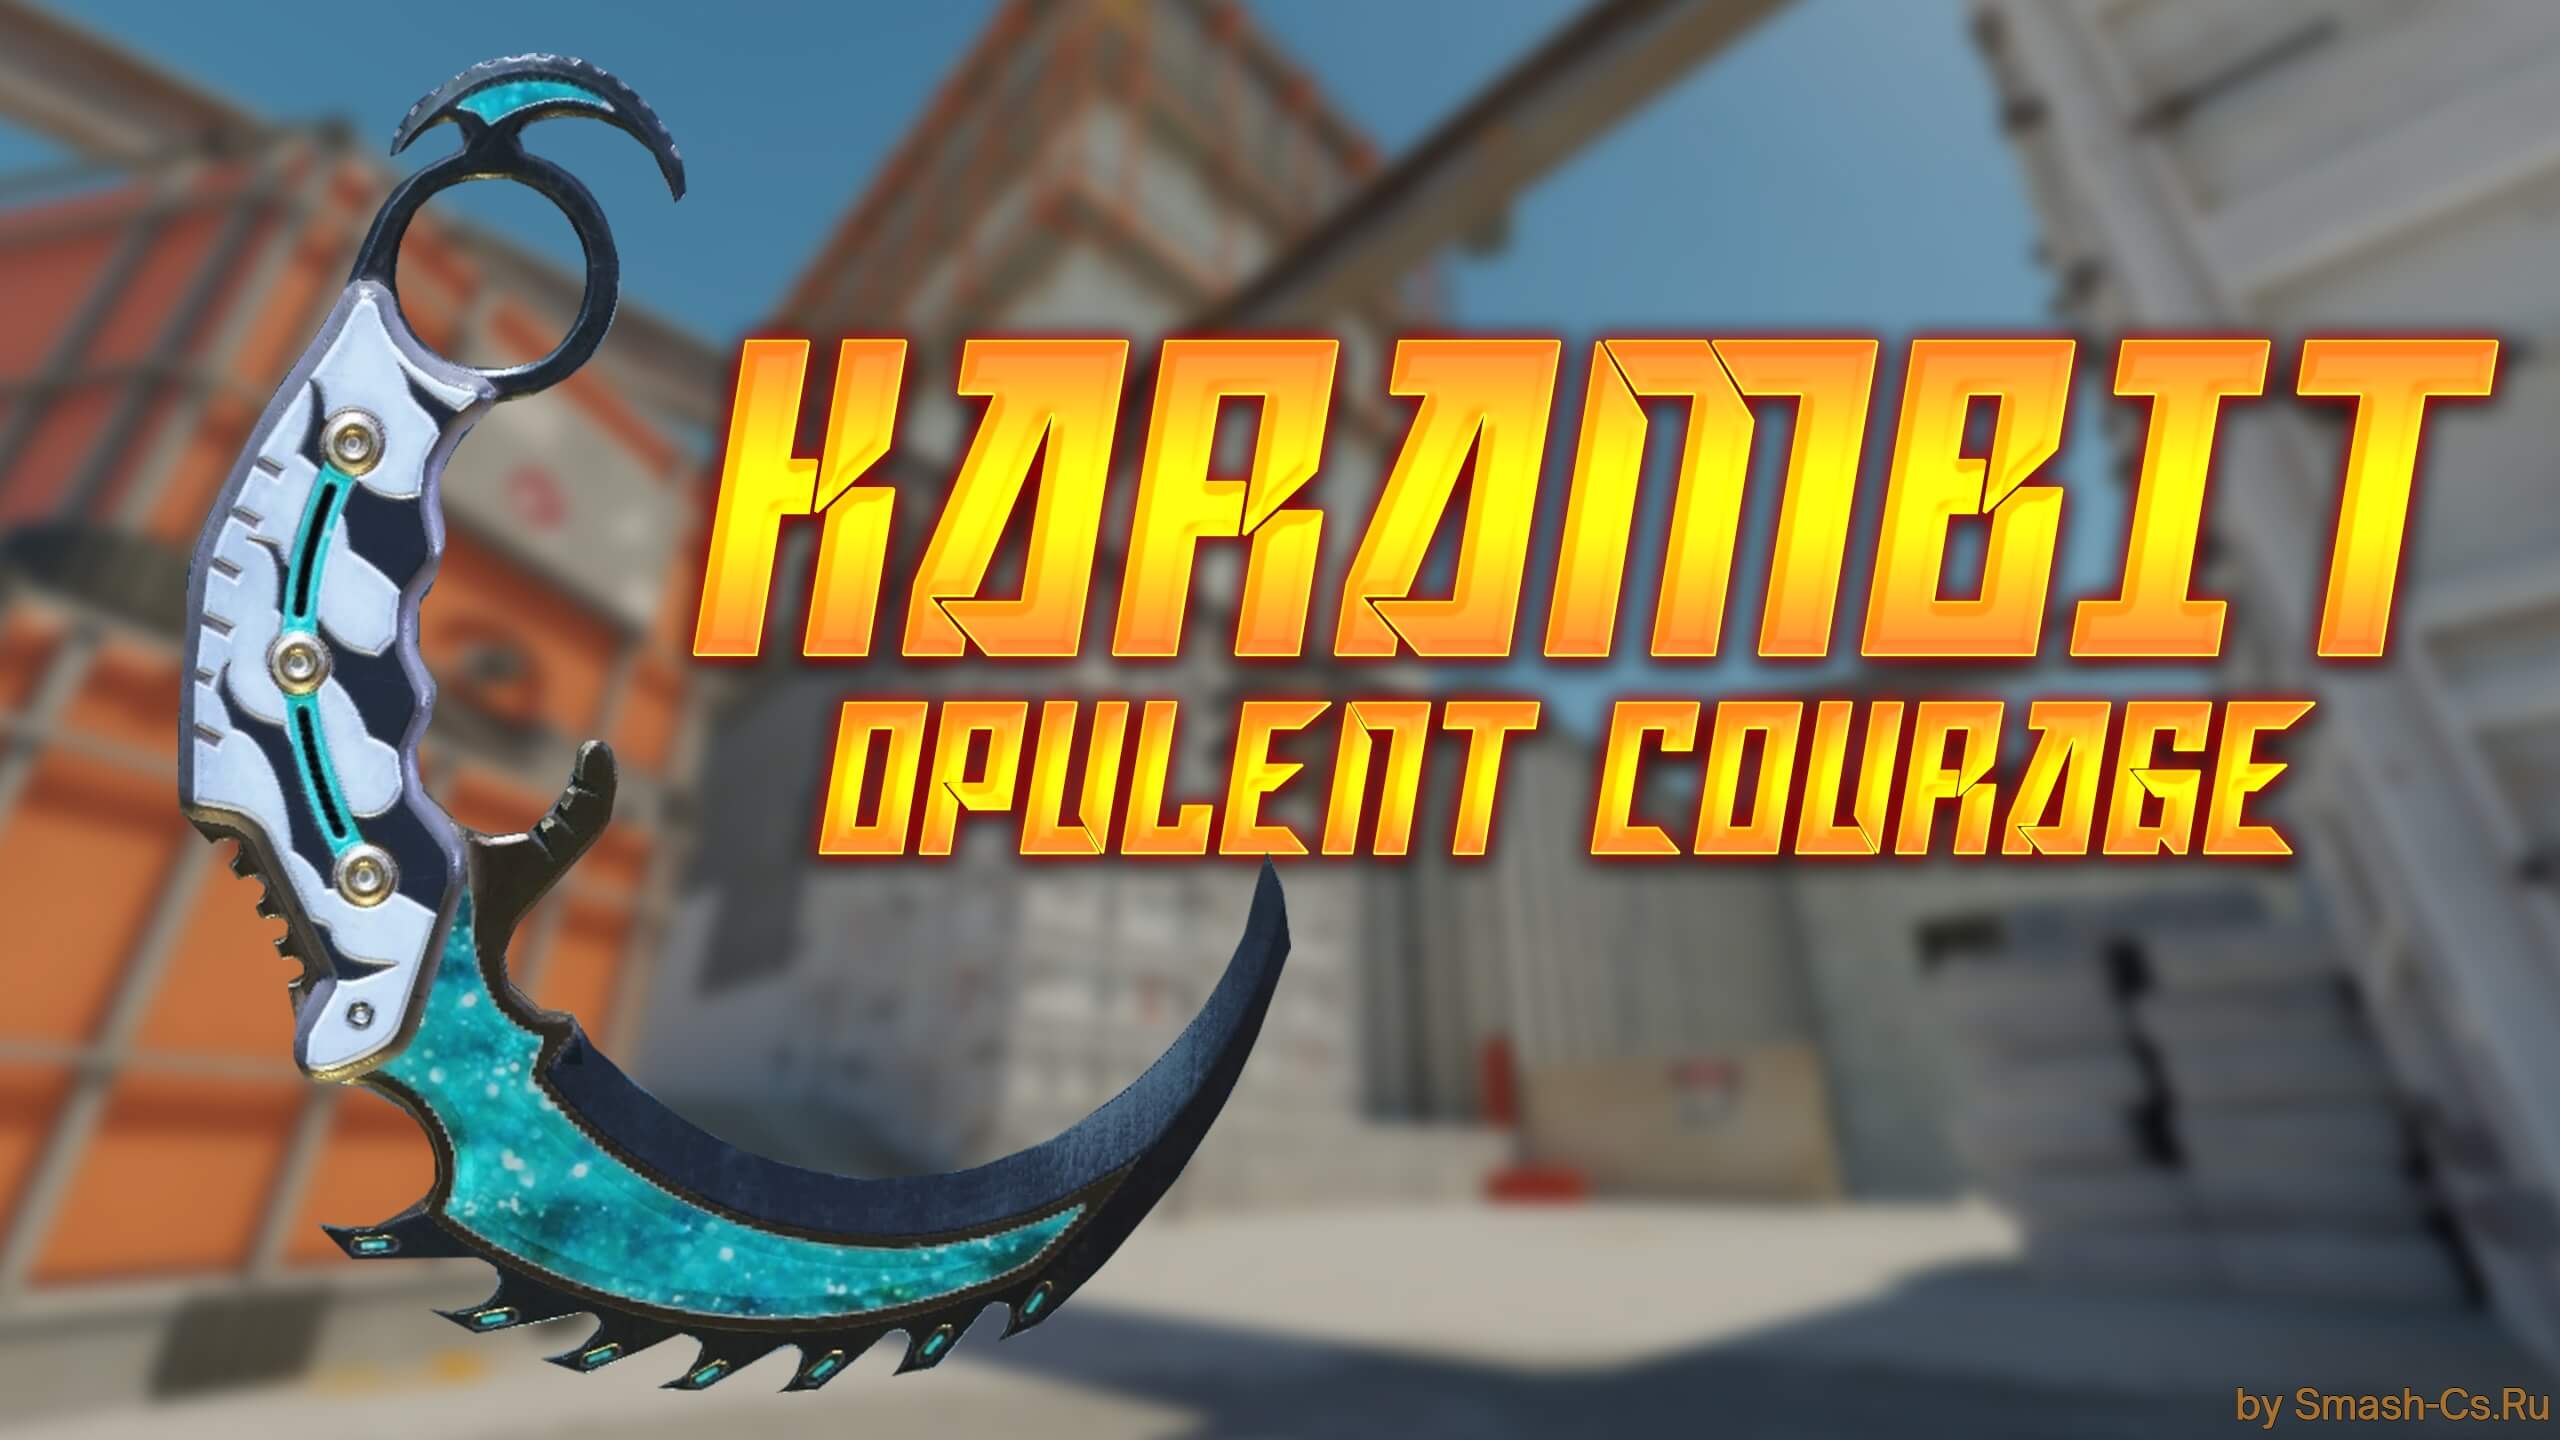 [Call of Duty Mobile] Karambit Opulent Courage For CSS92+